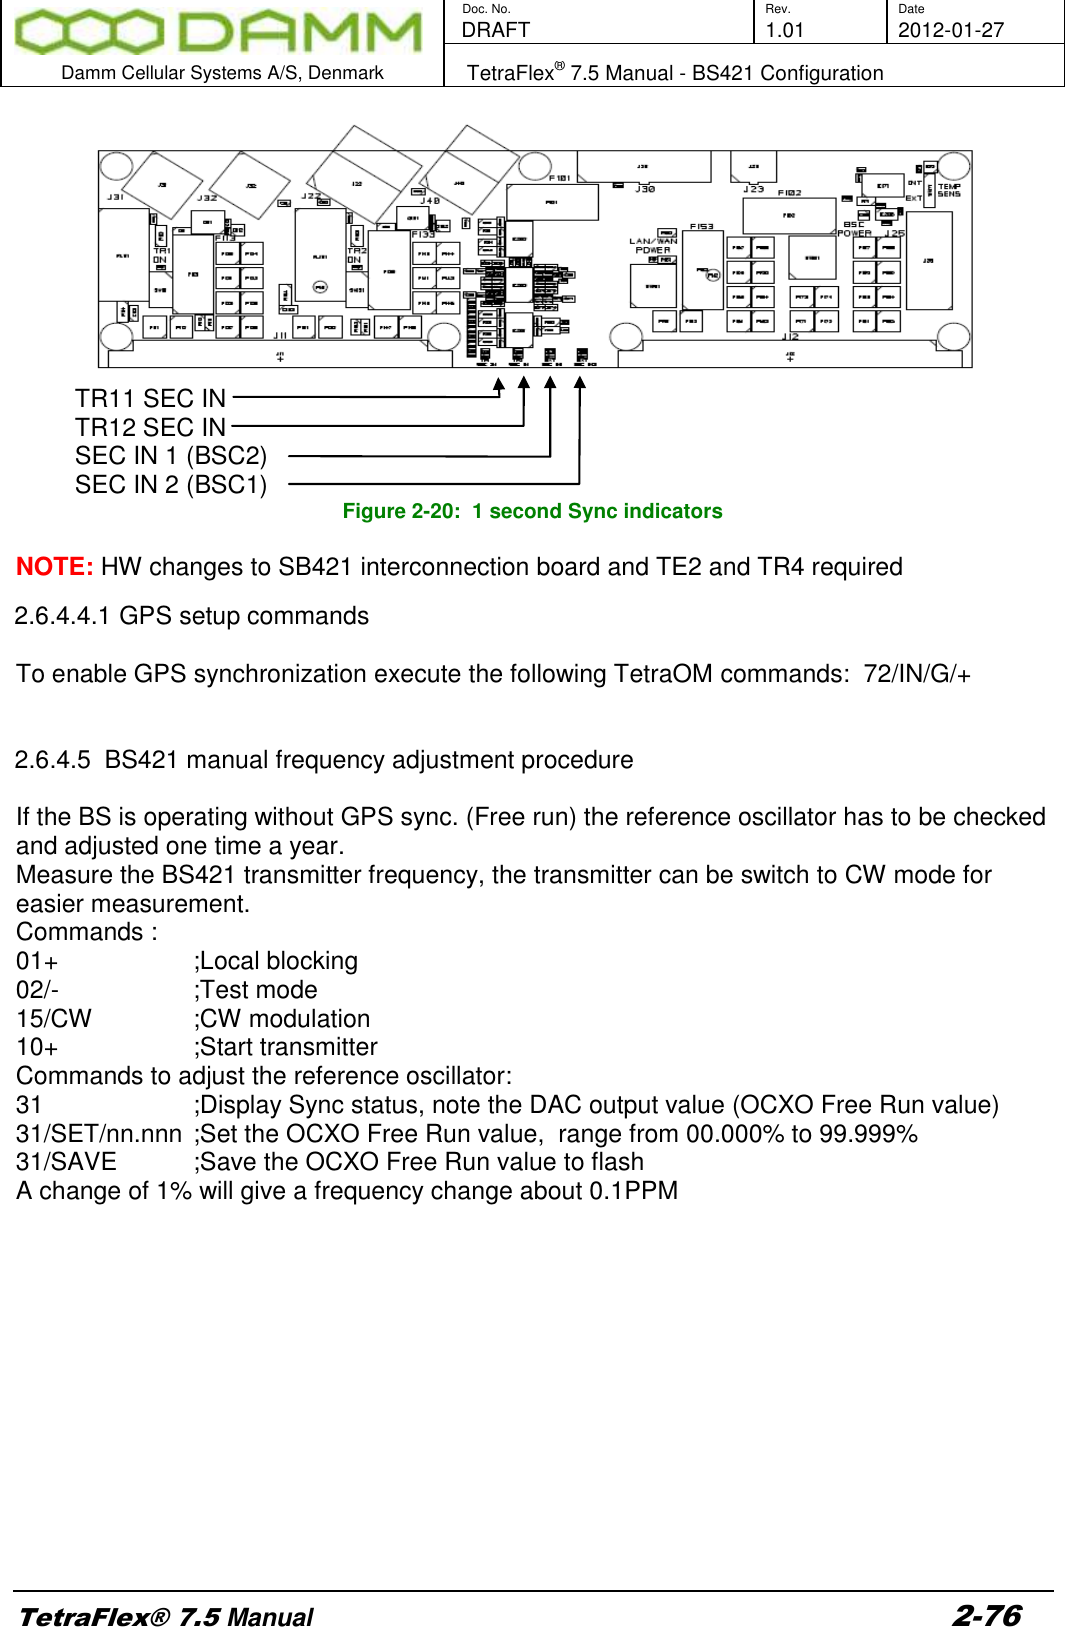        Doc. No. Rev. Date    DRAFT  1.01 2012-01-27  Damm Cellular Systems A/S, Denmark   TetraFlex® 7.5 Manual - BS421 Configuration  TetraFlex® 7.5 Manual 2-76  TR11 SEC IN TR12 SEC IN SEC IN 1 (BSC2) SEC IN 2 (BSC1)   Figure 2-20:  1 second Sync indicators  NOTE: HW changes to SB421 interconnection board and TE2 and TR4 required 2.6.4.4.1 GPS setup commands  To enable GPS synchronization execute the following TetraOM commands:  72/IN/G/+   2.6.4.5  BS421 manual frequency adjustment procedure  If the BS is operating without GPS sync. (Free run) the reference oscillator has to be checked and adjusted one time a year.   Measure the BS421 transmitter frequency, the transmitter can be switch to CW mode for easier measurement. Commands : 01+      ;Local blocking 02/-      ;Test mode 15/CW     ;CW modulation 10+      ;Start transmitter Commands to adjust the reference oscillator: 31      ;Display Sync status, note the DAC output value (OCXO Free Run value) 31/SET/nn.nnn ;Set the OCXO Free Run value,  range from 00.000% to 99.999%  31/SAVE    ;Save the OCXO Free Run value to flash A change of 1% will give a frequency change about 0.1PPM             